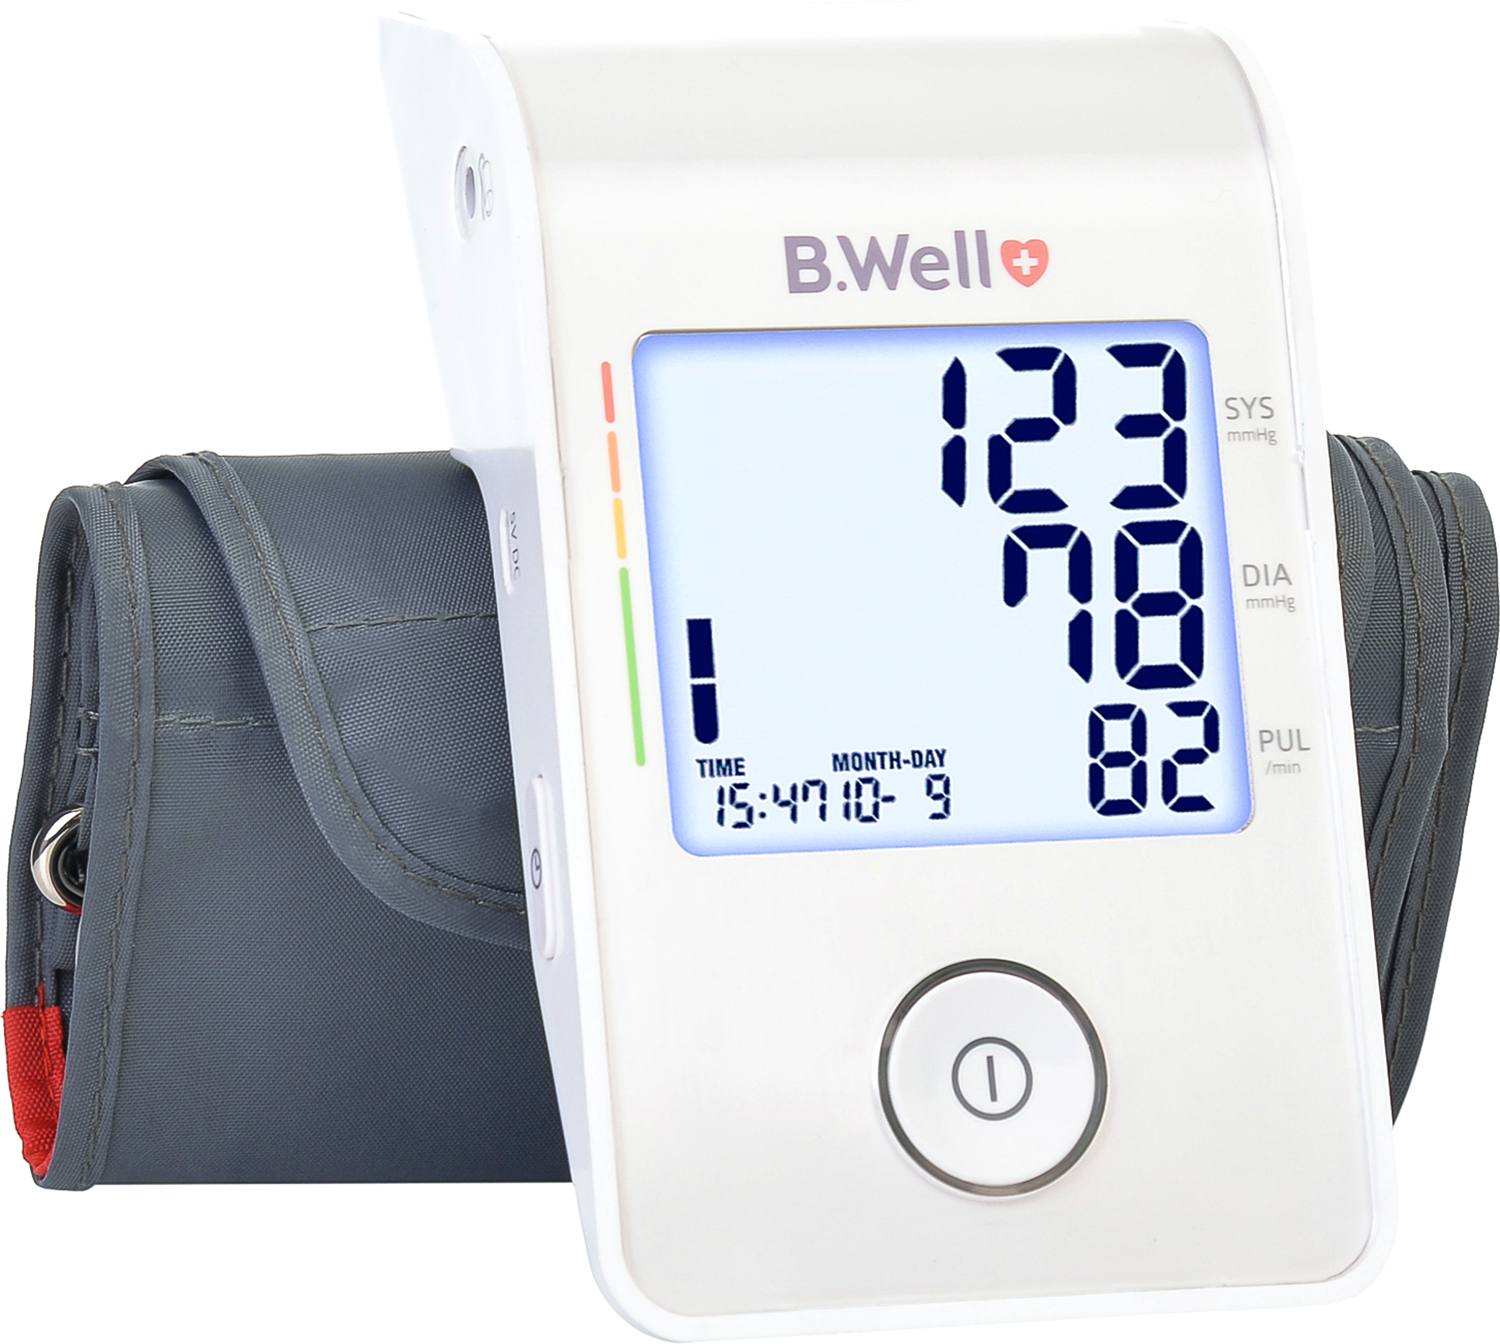 Automatic blood pressure monitor - MED-53 - B.Well Swiss - arm / with  rechargeable battery / USB